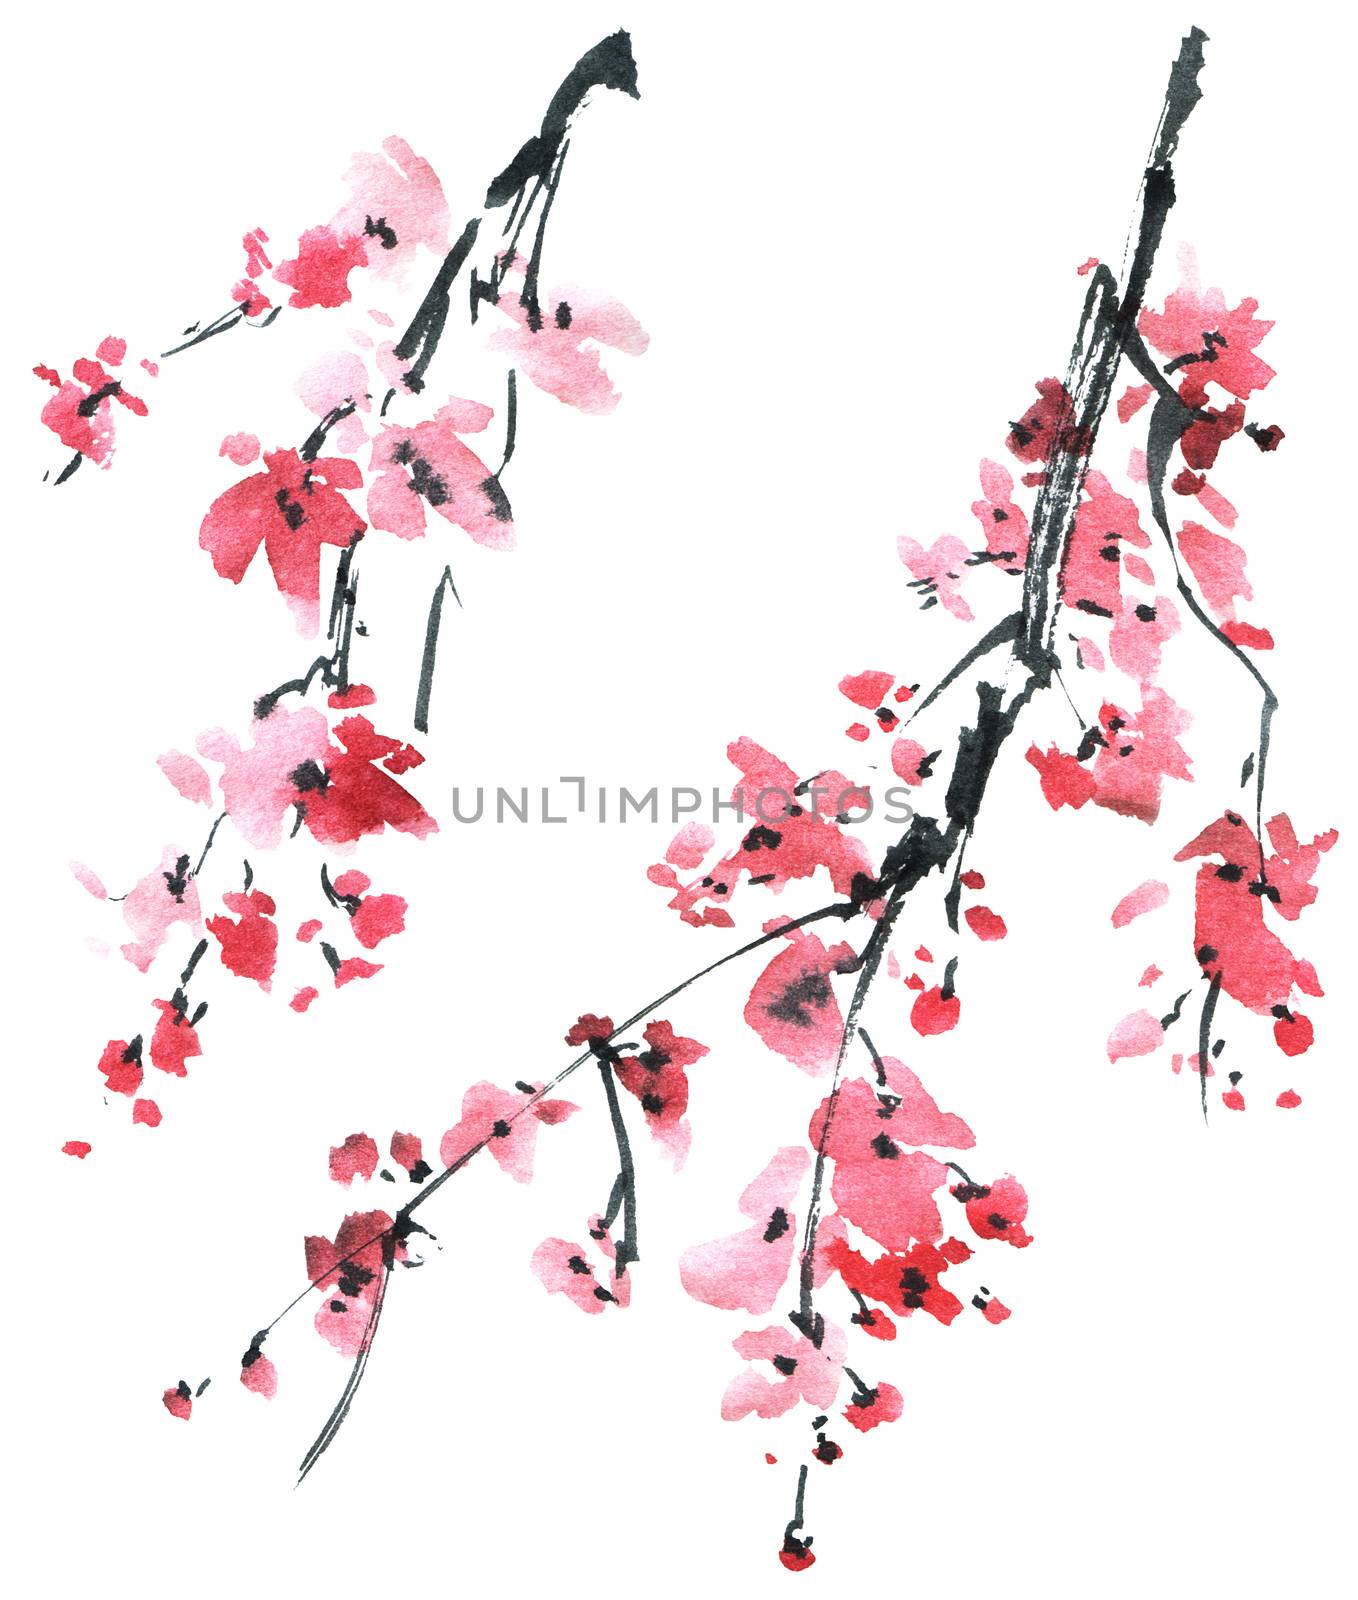 Watercolor and ink illustration of blossom sakura tree with pink flowers on white background. Oriental traditional painting in style sumi-e, u-sin.